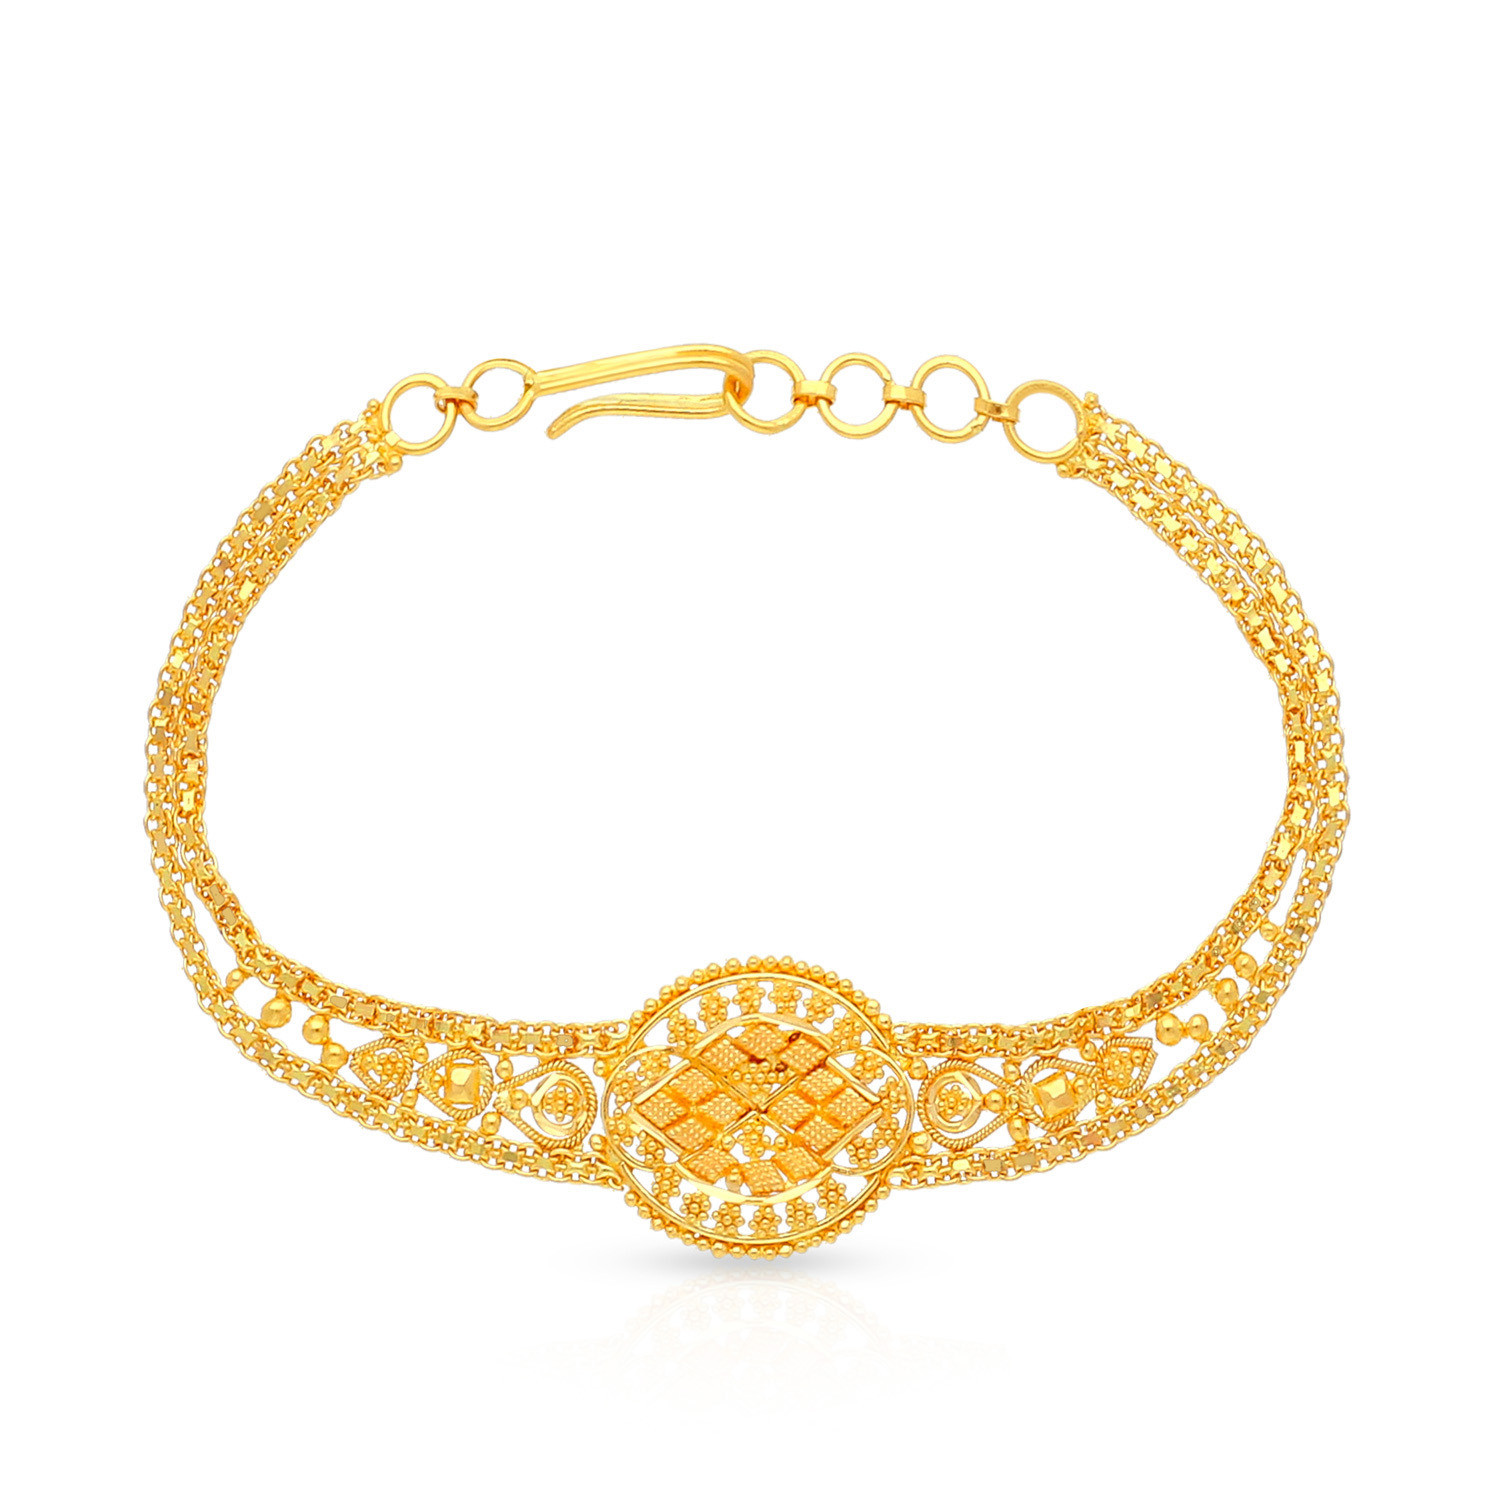 Buy MALABAR GOLD AND DIAMONDS Womens Gold Bracelet SKYBR123 | Shoppers Stop